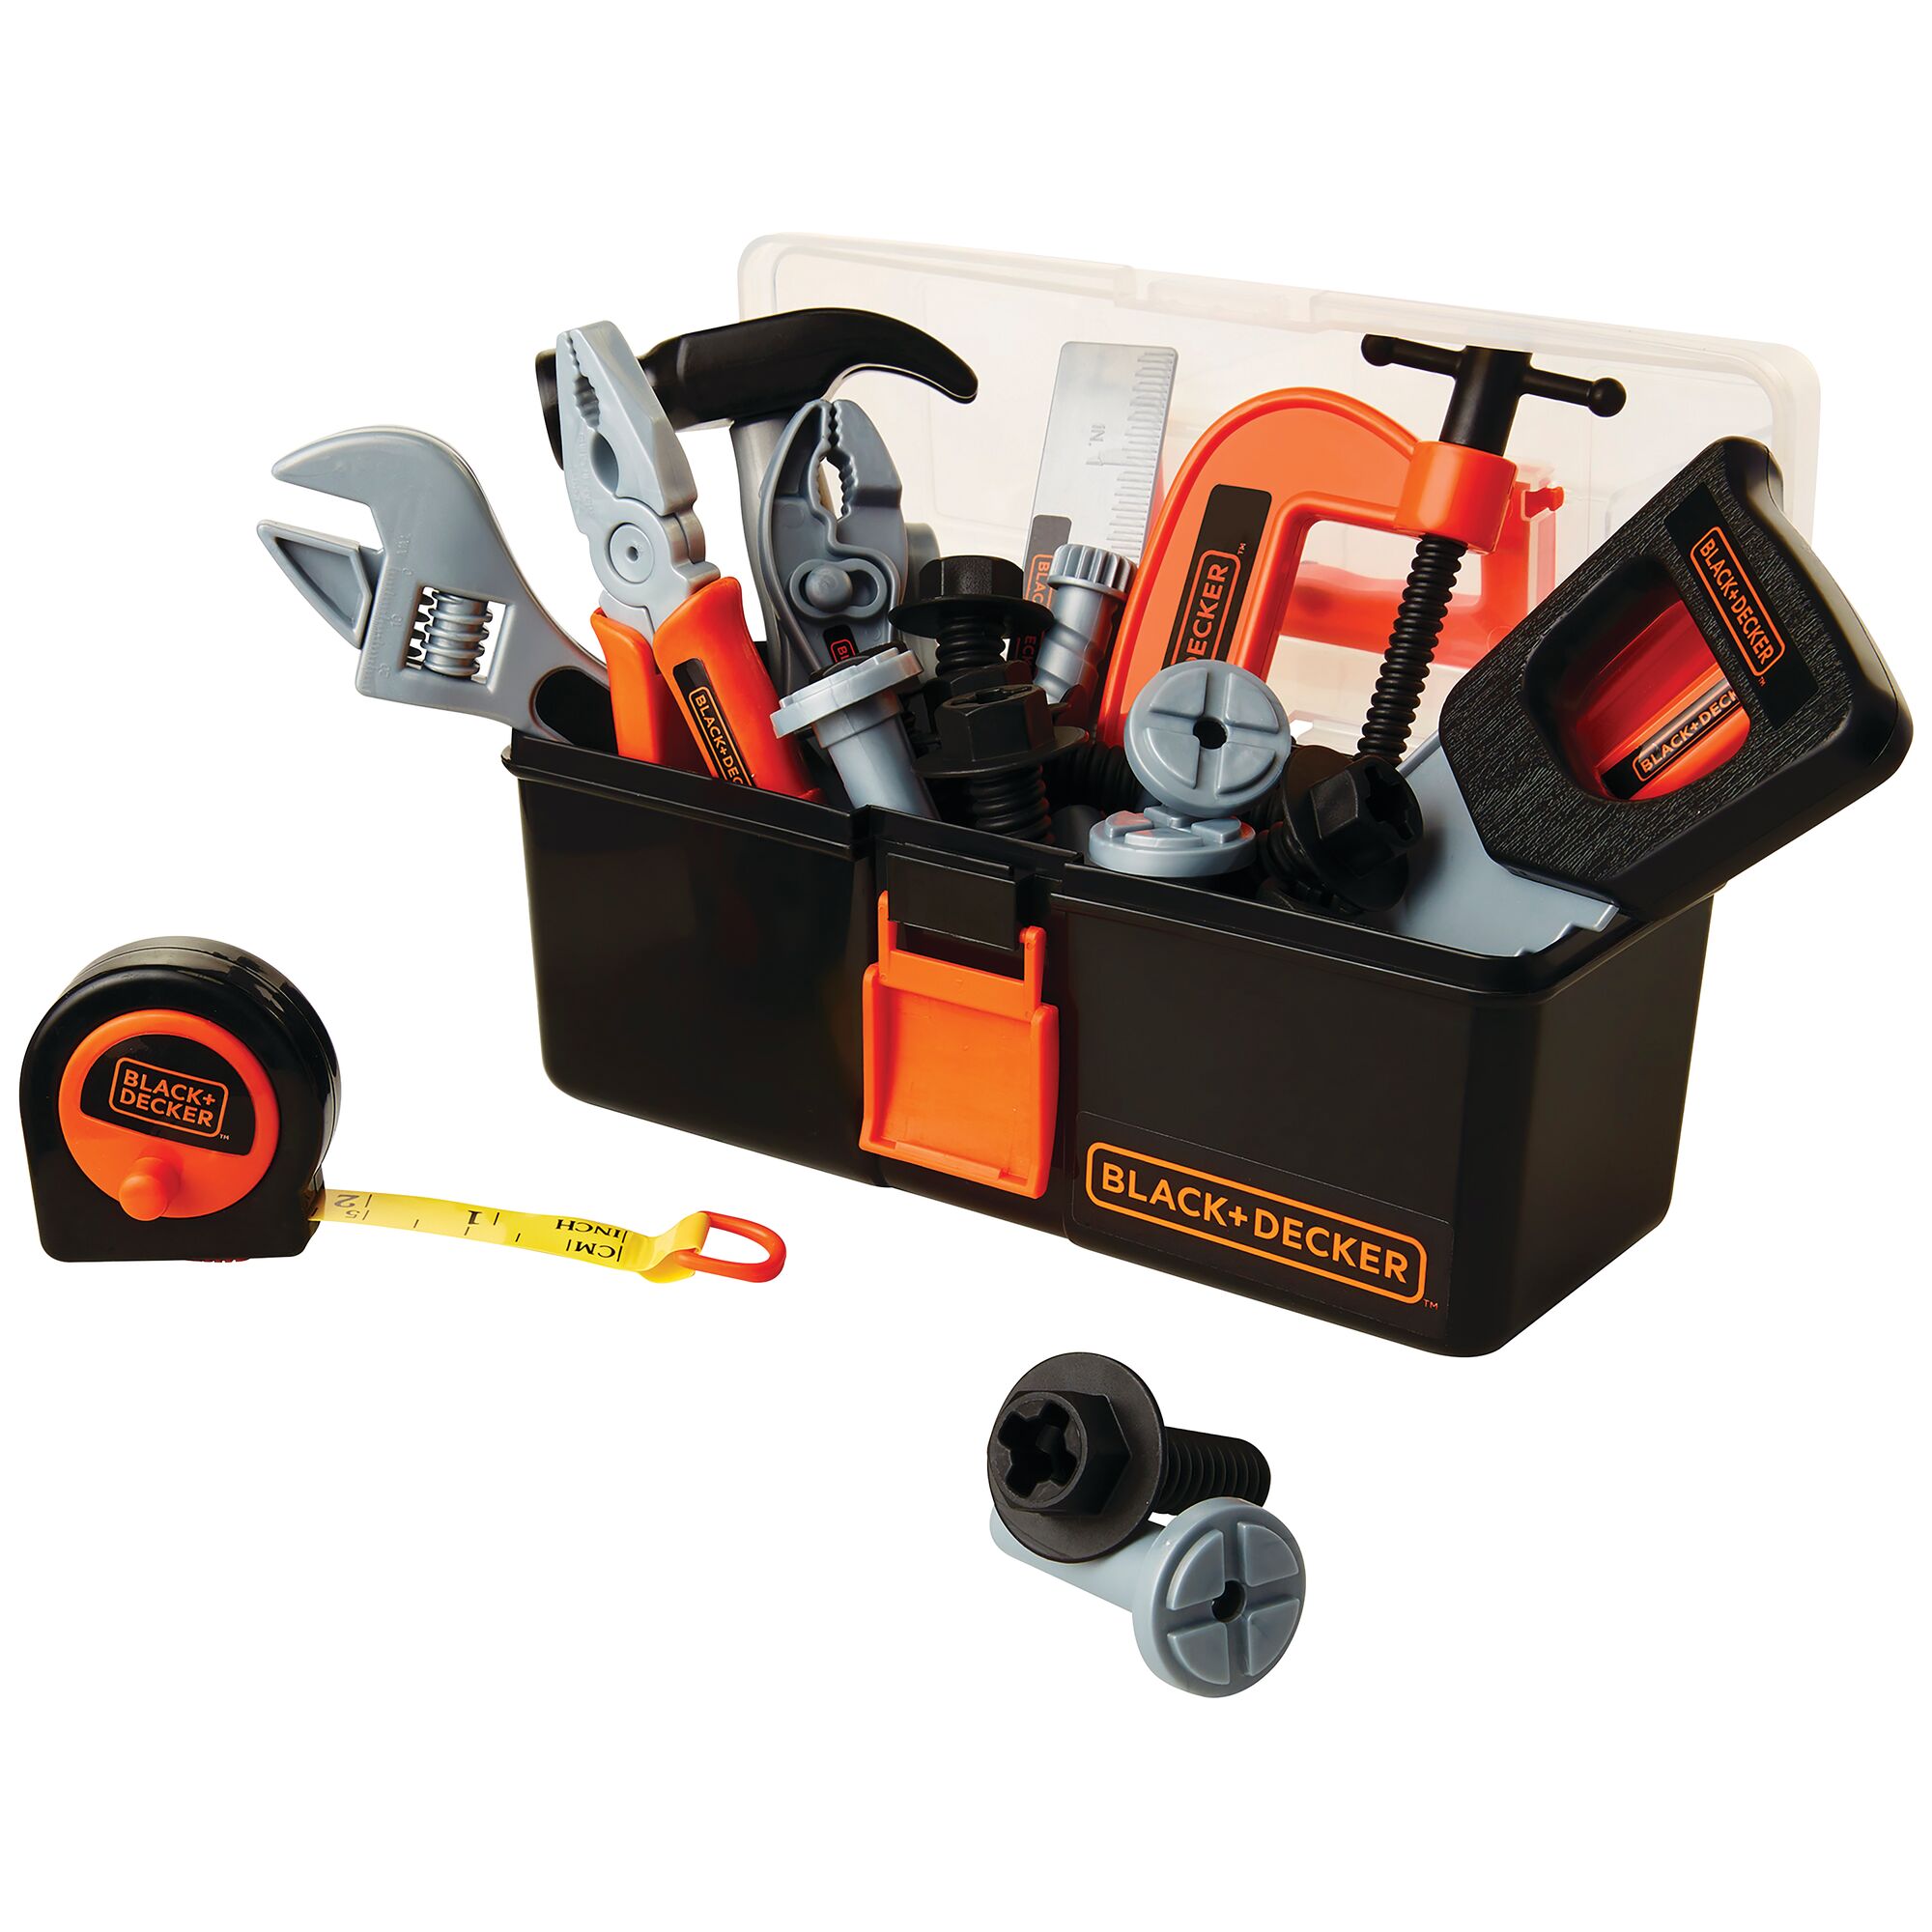 Profile of junior 50 piece carpenter dress up set with toy tools.